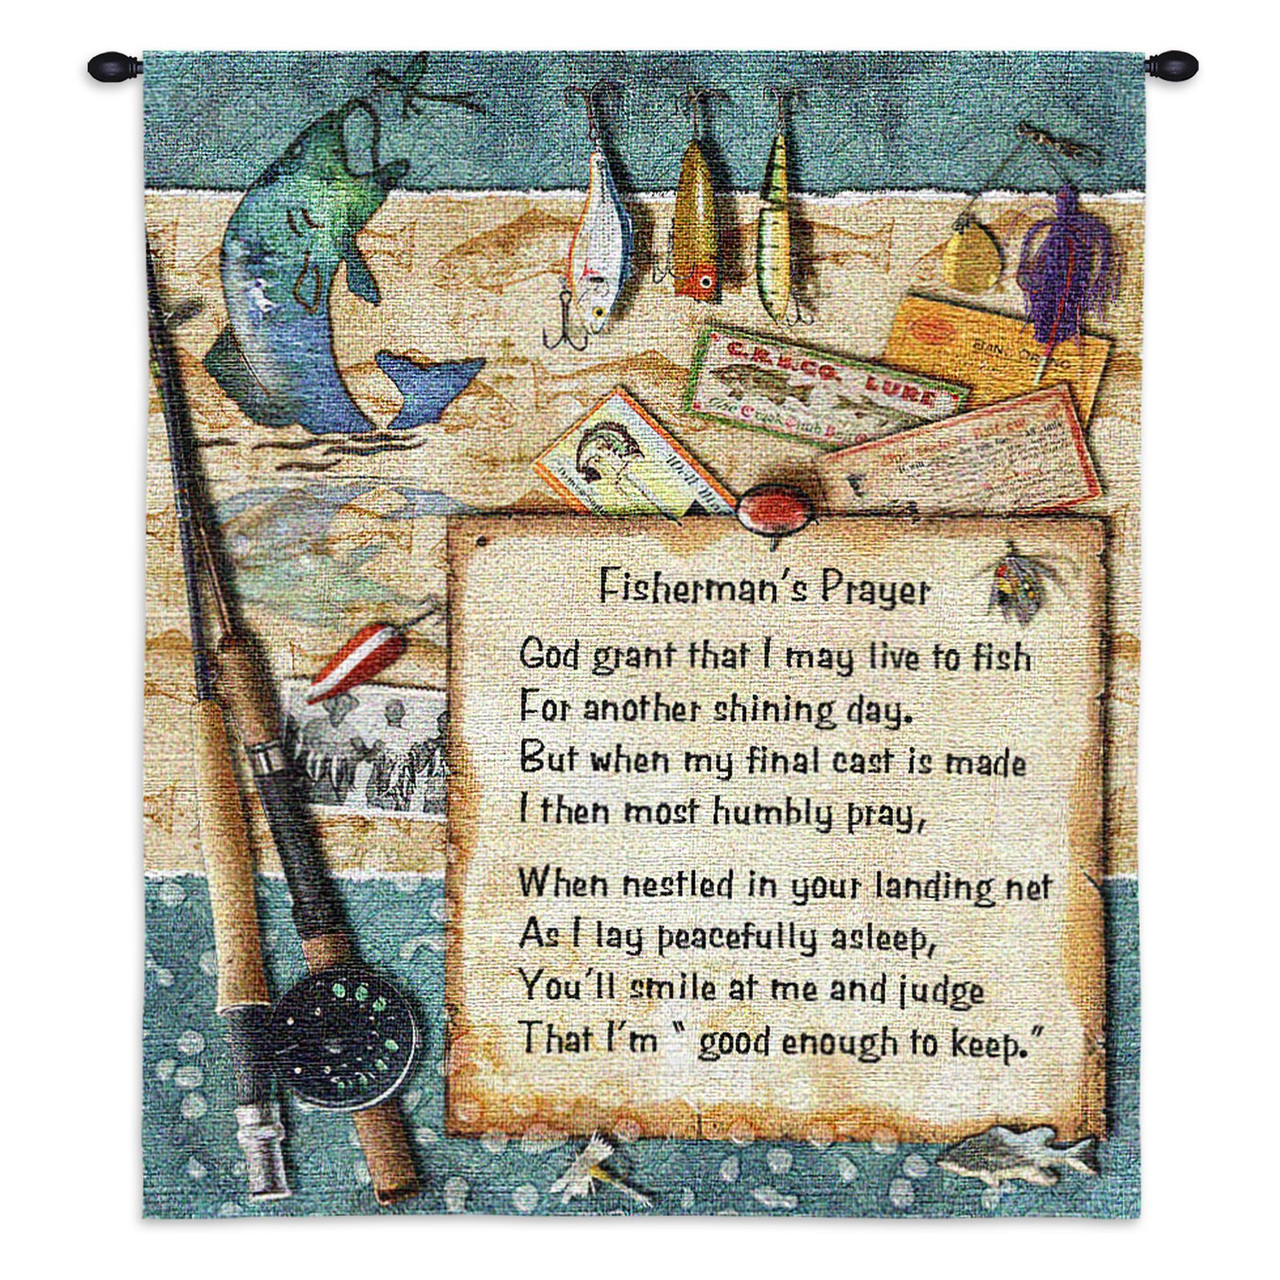 https://cdn1.bigcommerce.com/server6200/zkyw0/products/4318/images/447735/Fishermans_Prayer_Wall_Tapestry_3178-WH-D__06514.1665706494.1280.1280.JPG?c=2